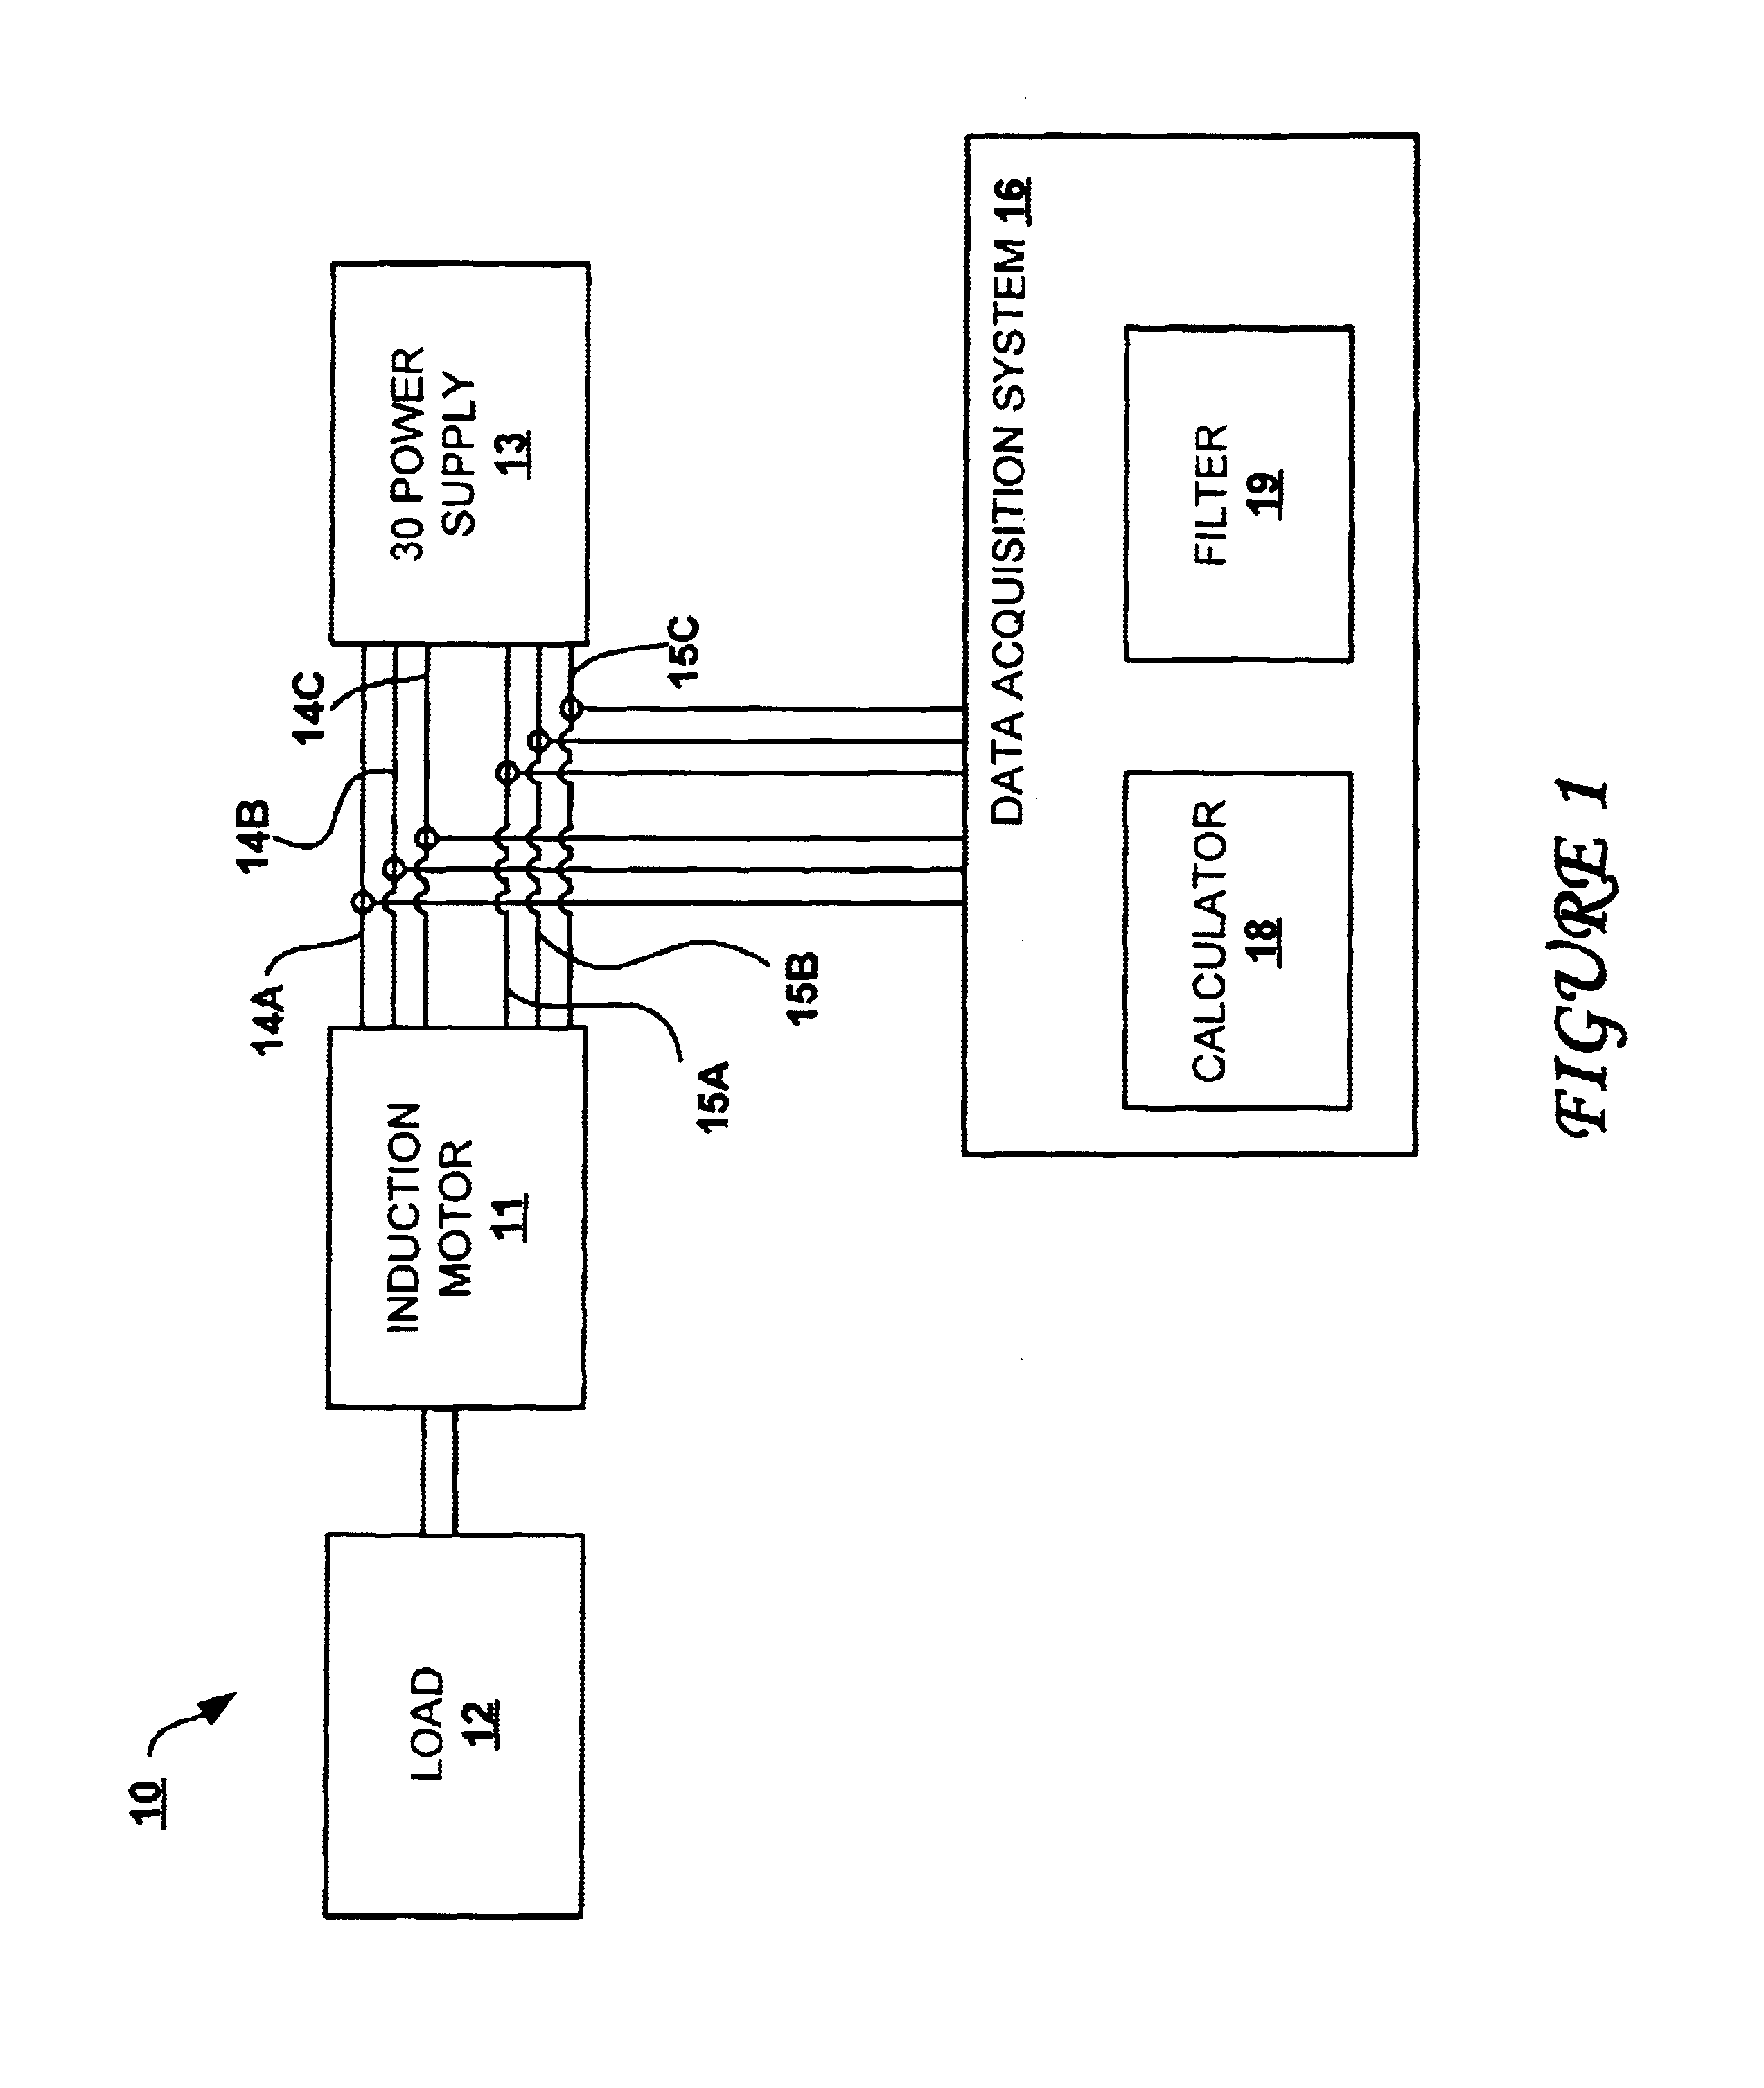 Method and system for determining induction motor speed